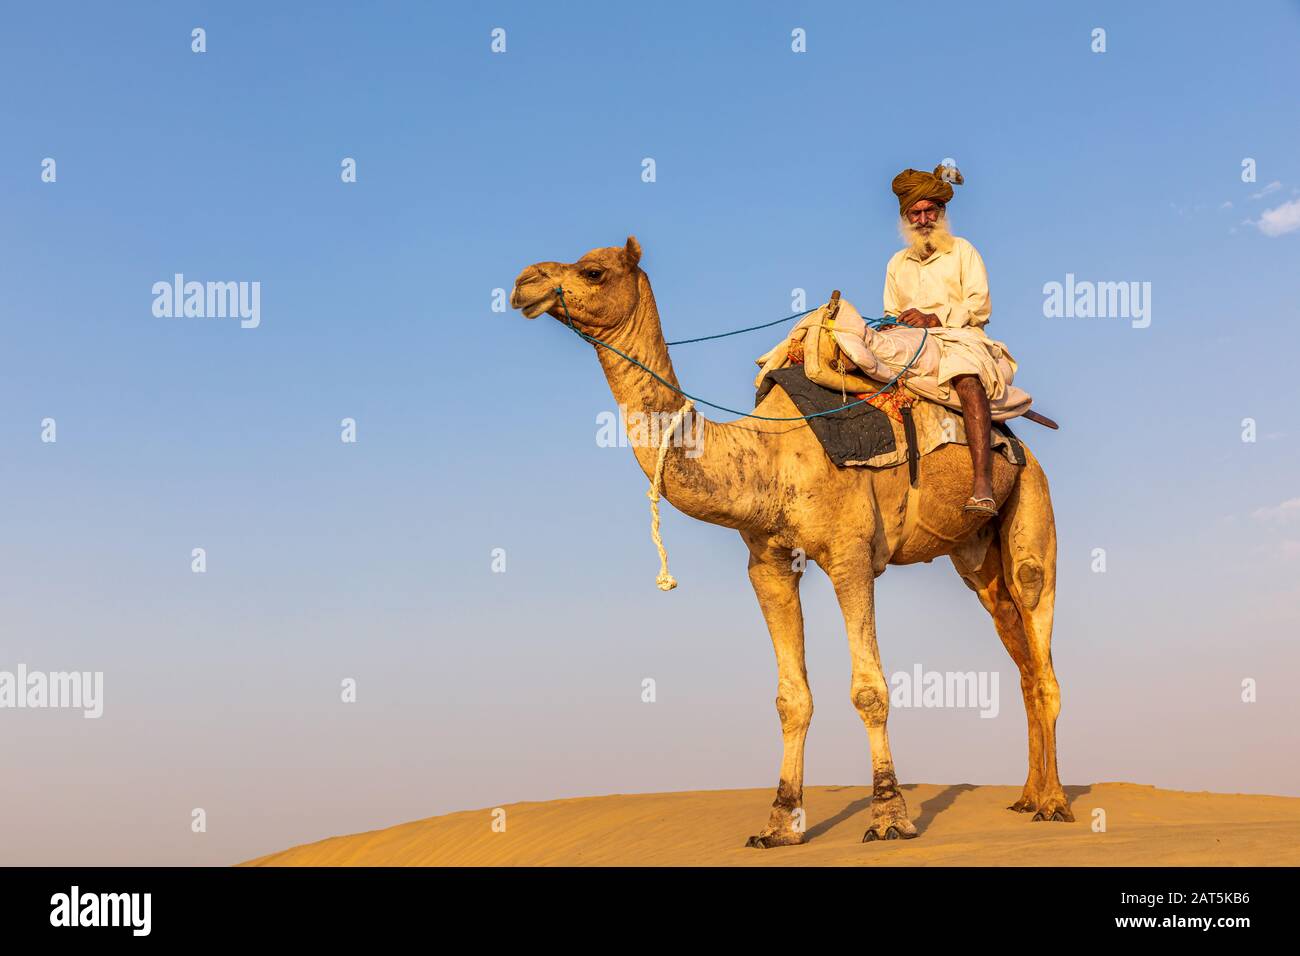 An old man with his camel, Thar desert, Rajasthan, India Stock Photo